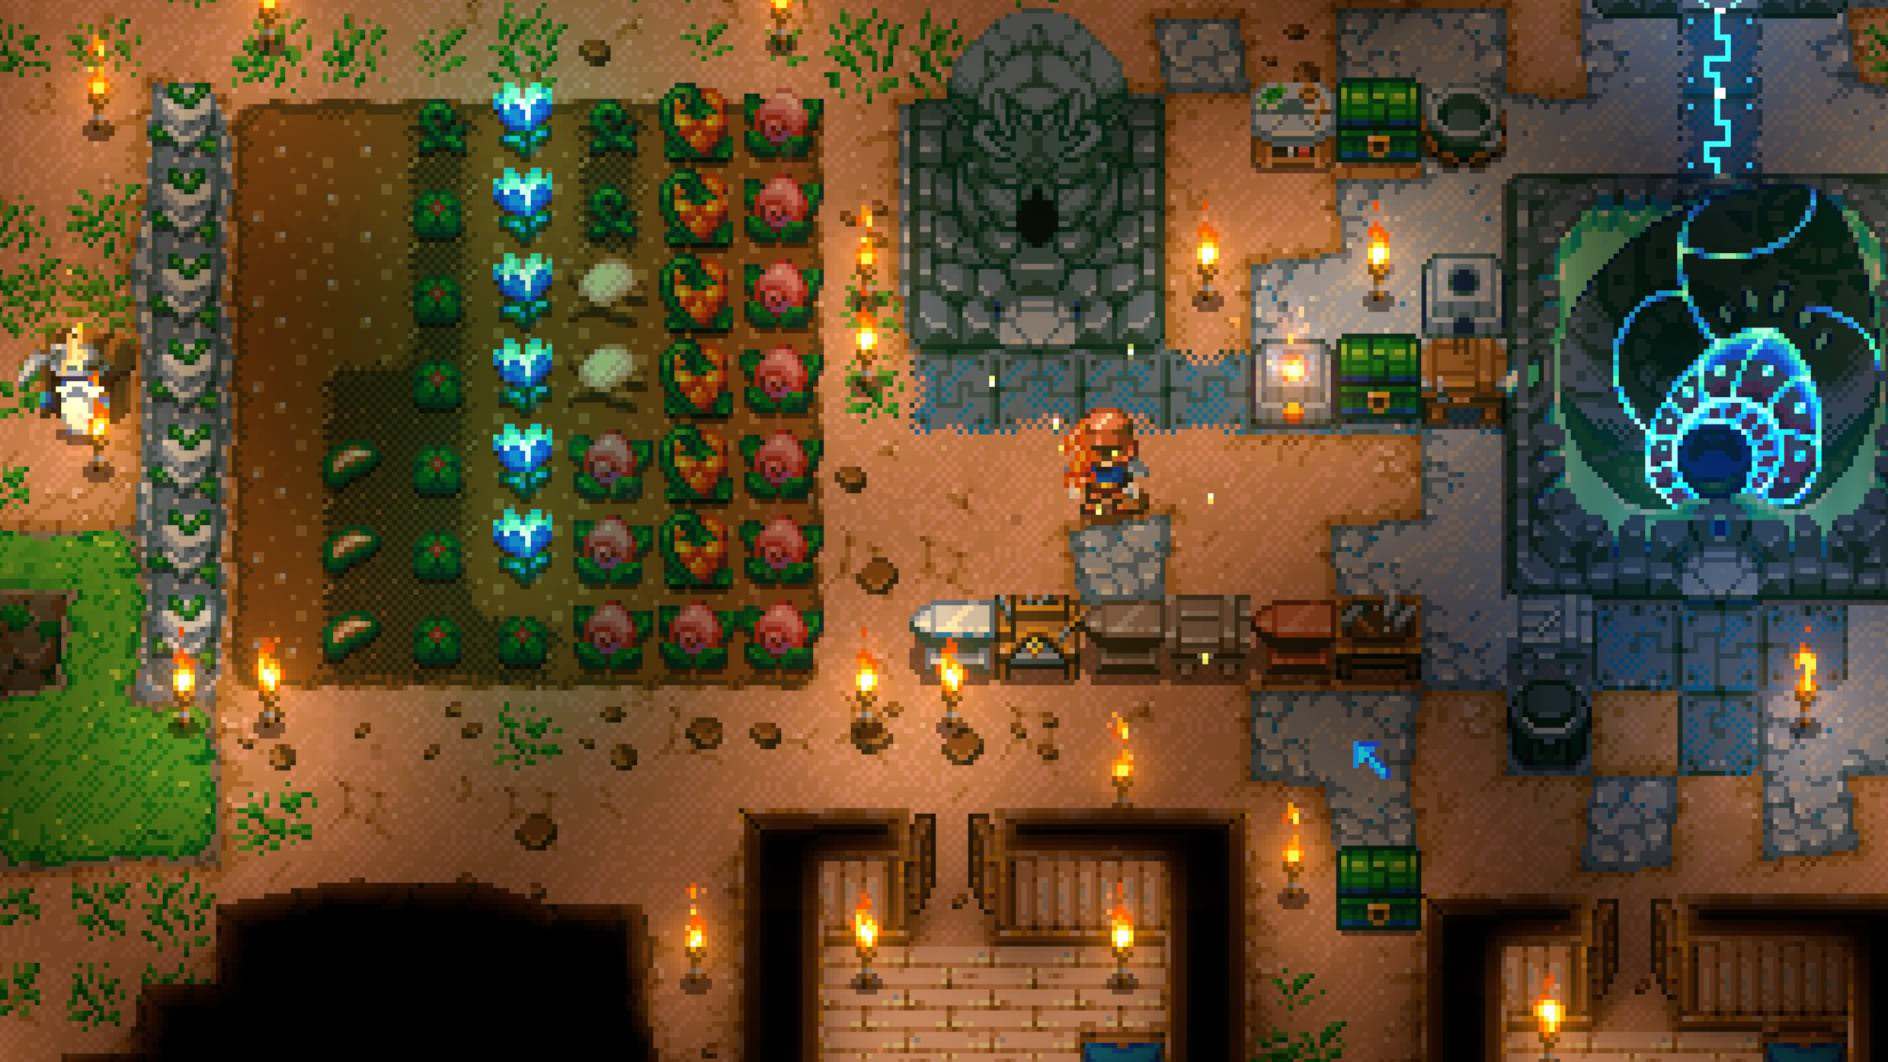 Player farming inside of their base, with colourful plants.